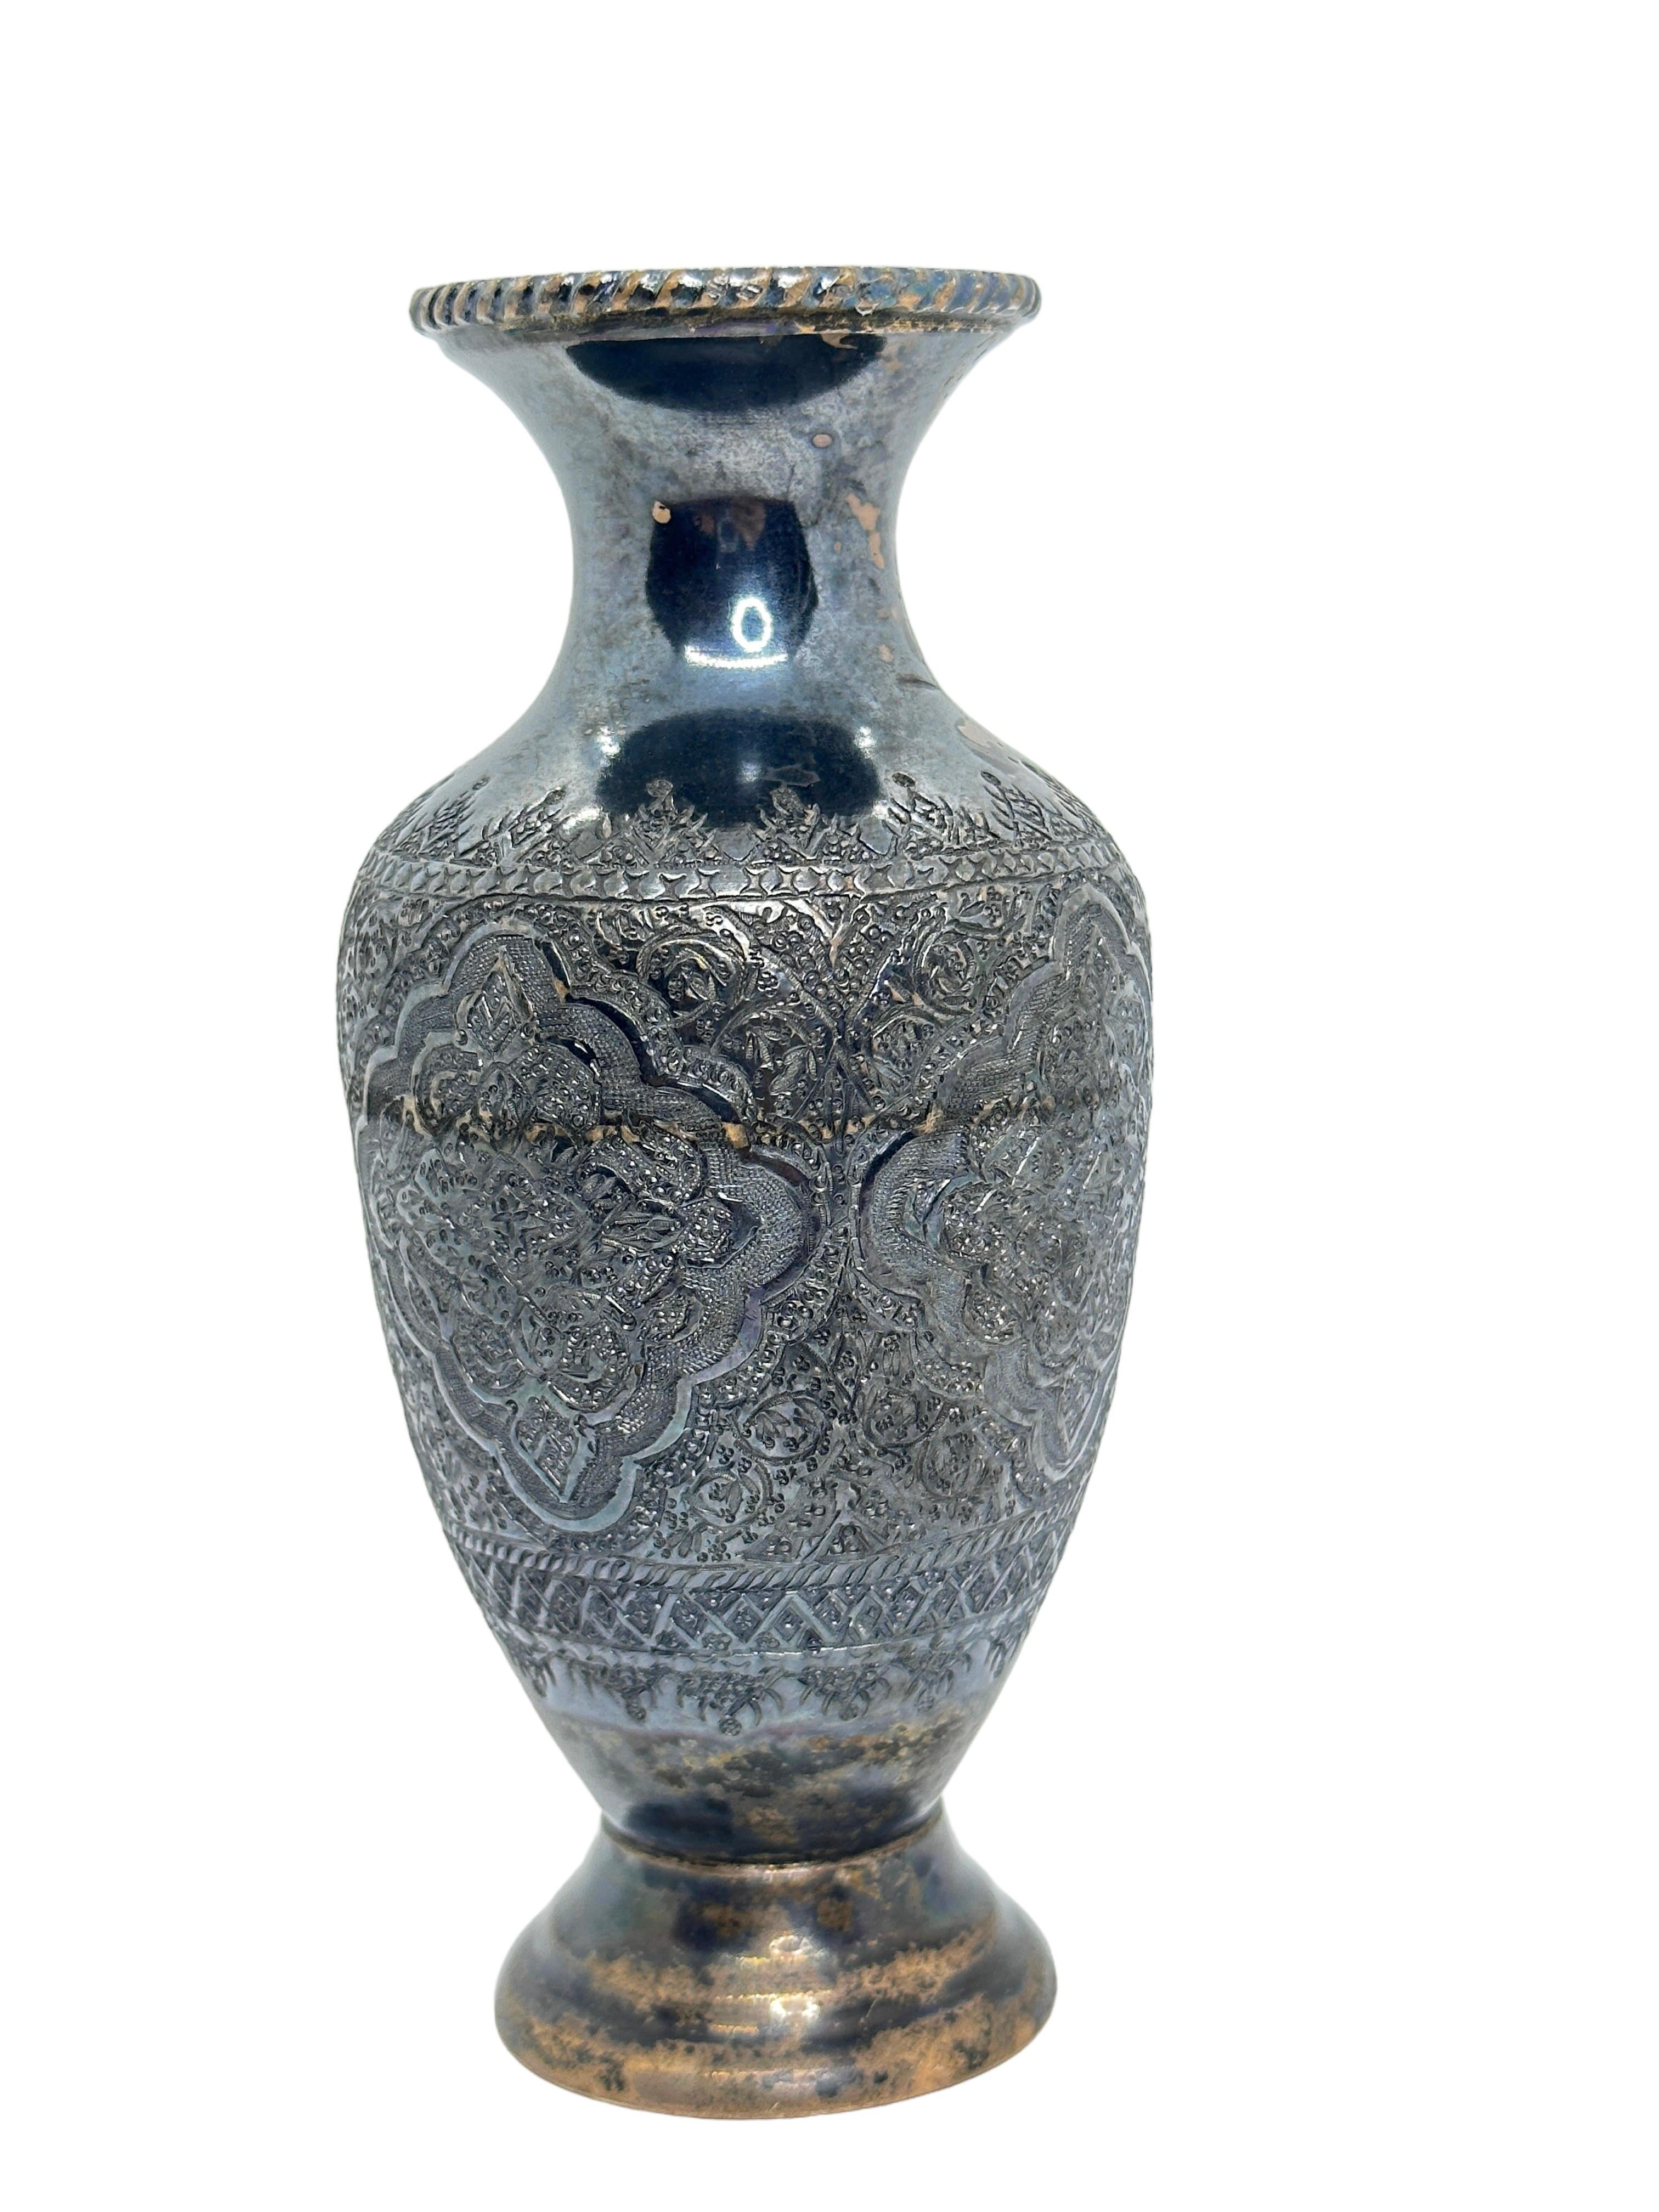 Gorgeous vintage handmade silver Vase. Sorry we don't know anything about it, but its beautiful. It is marked with a sign of the silversmith. I am unsure of the age of this object and would suggest it is a vintage item from the 20th century, due to